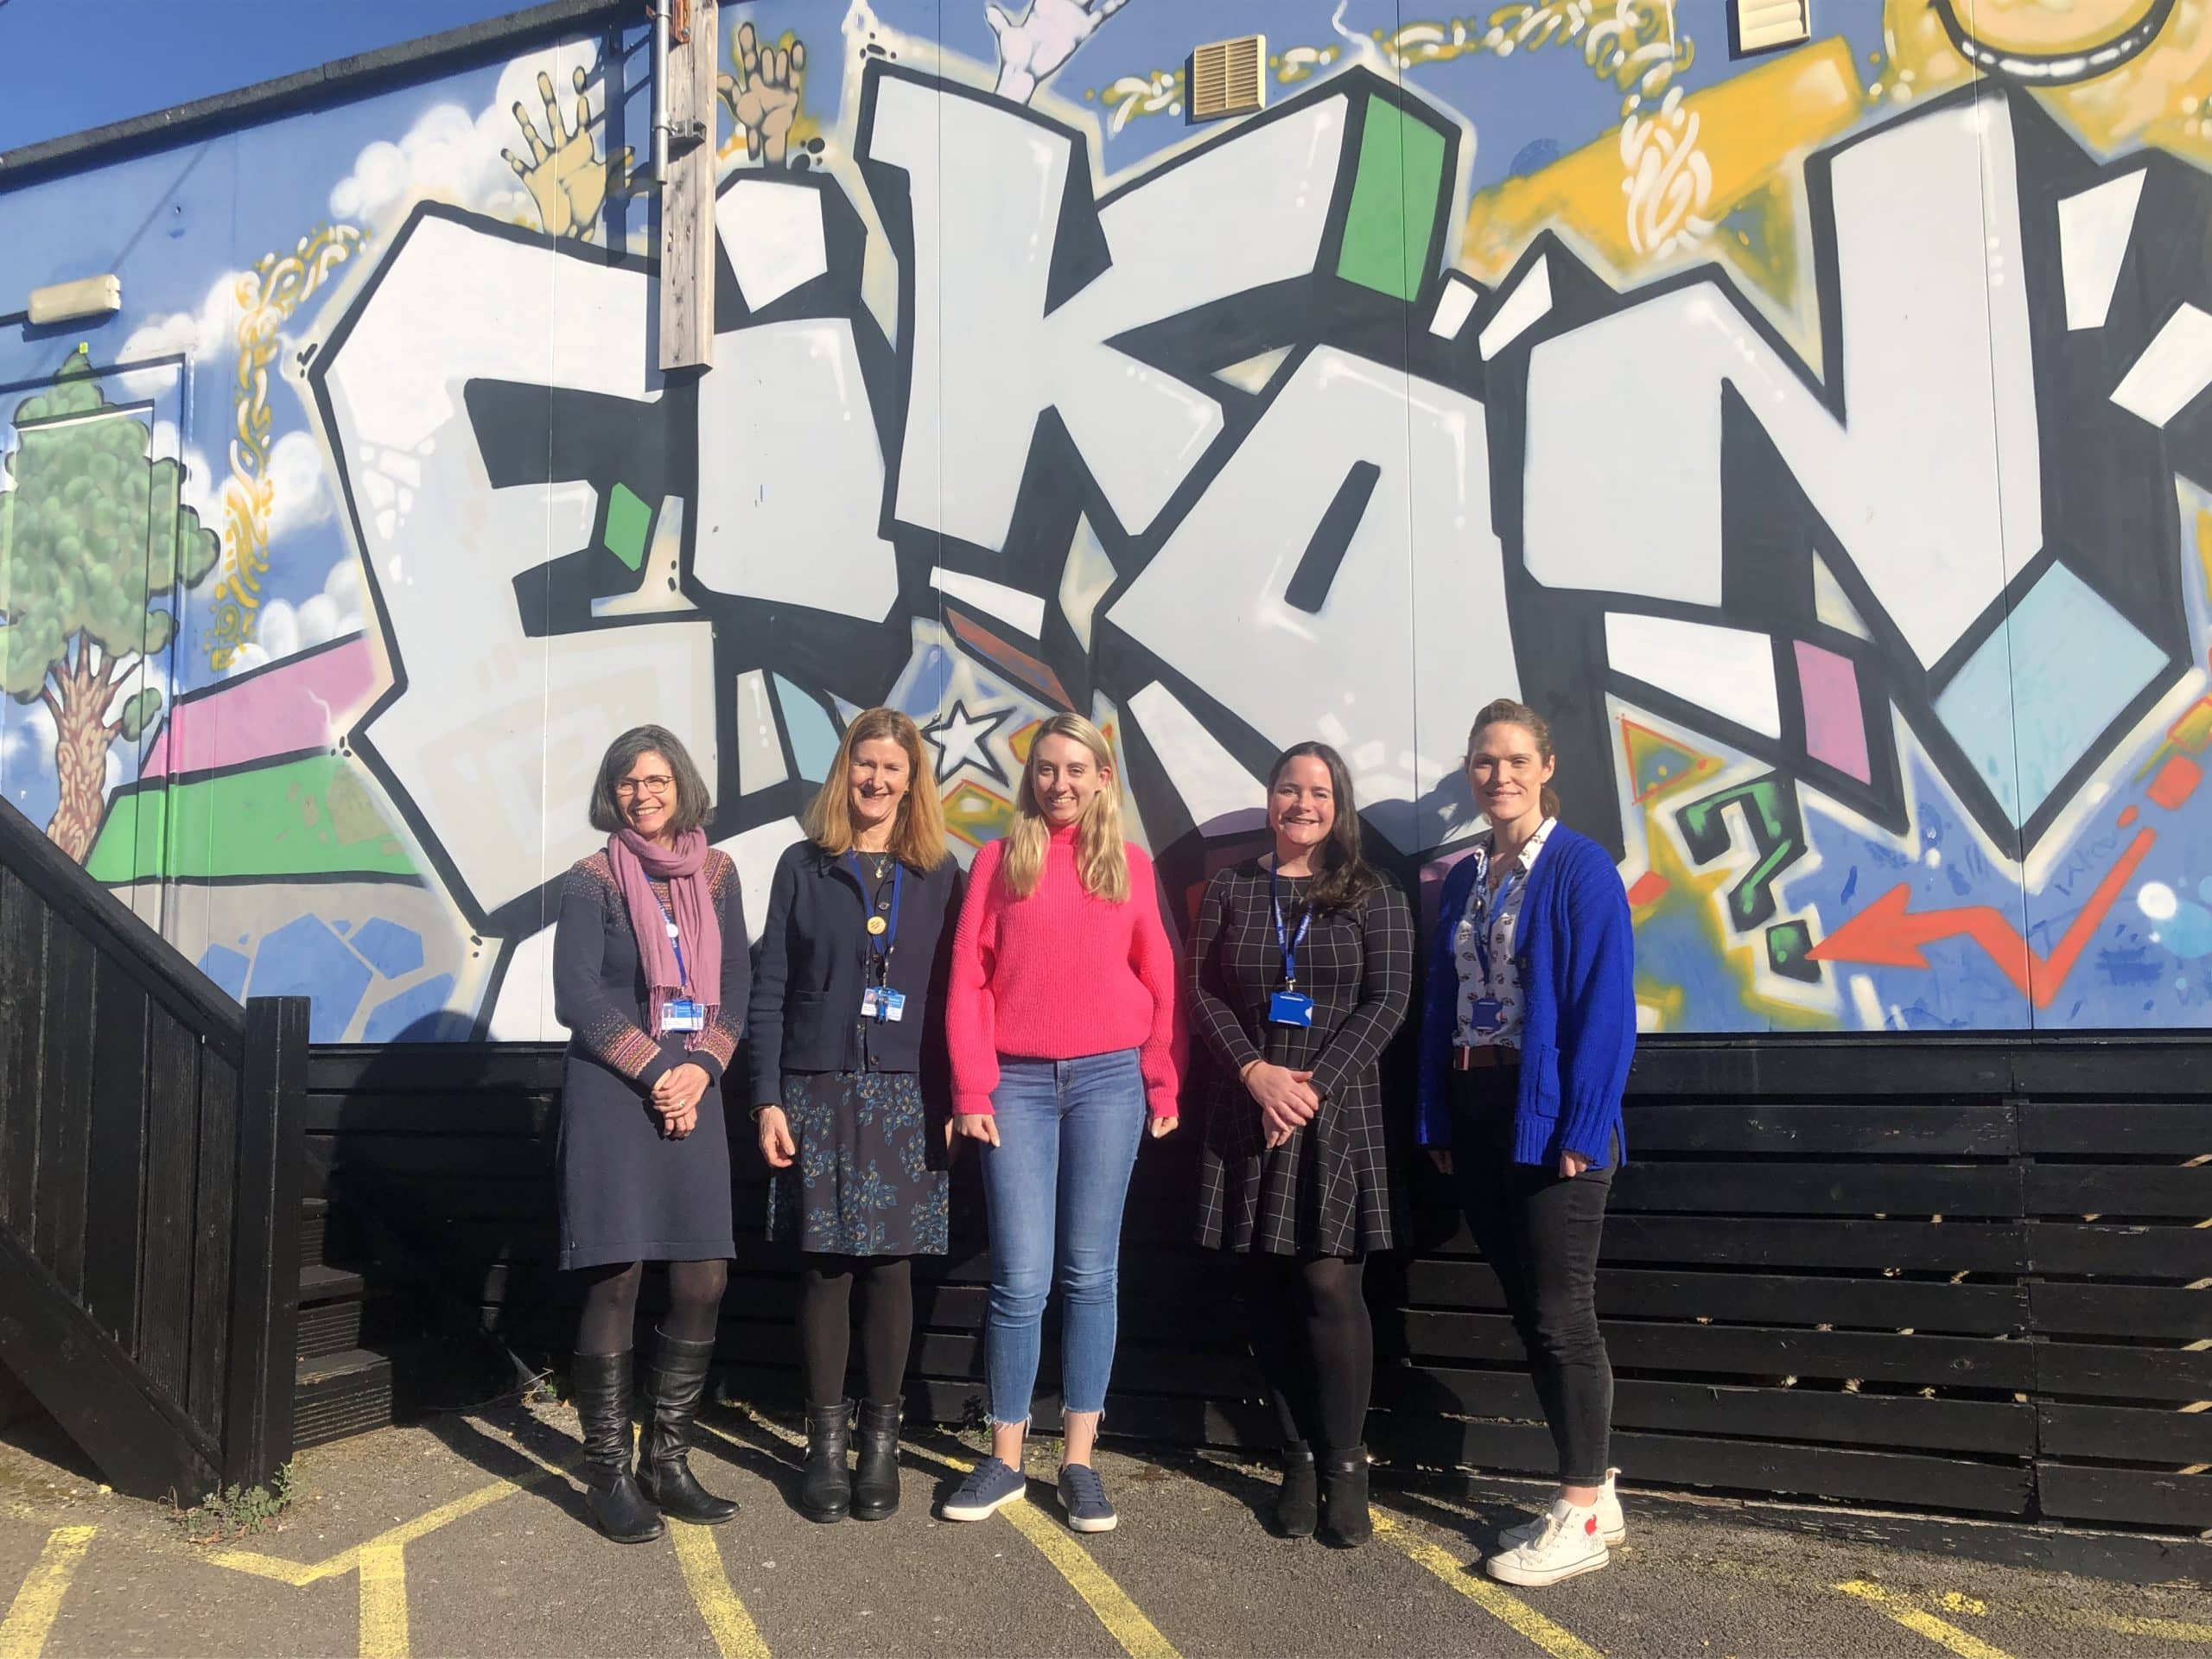 Deputy Commissioner Ellie Vesey-Thompson with representatives of Eikon Charity in front of graffiti wall with word Eikon